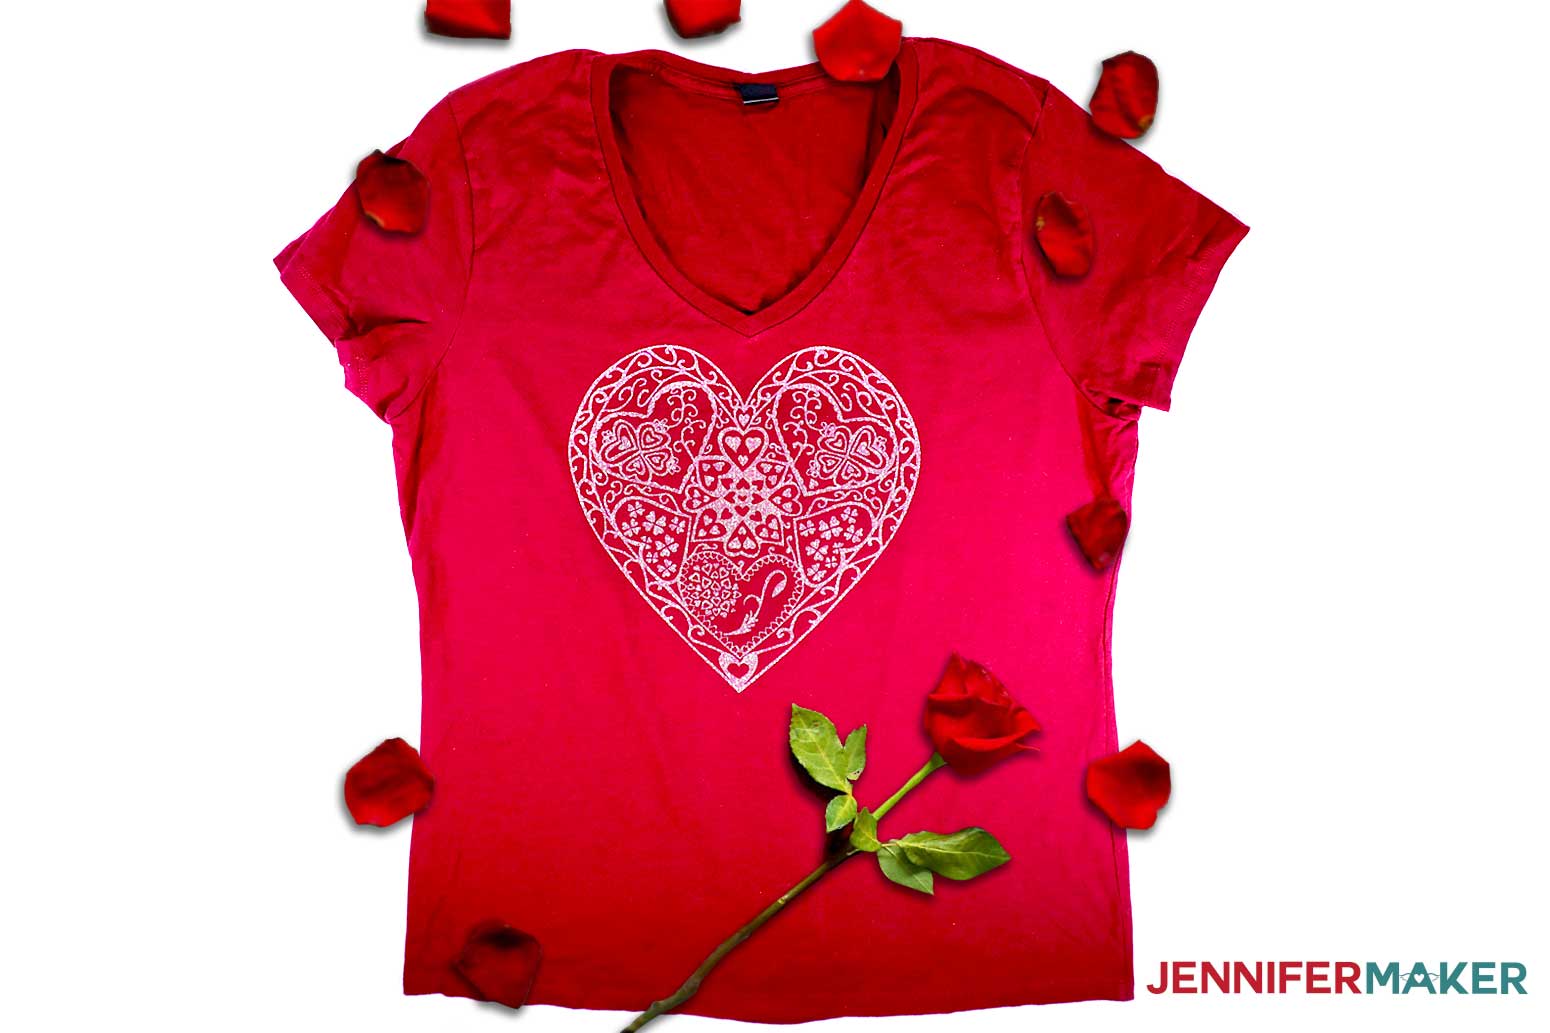 red valentine heart Essential T-Shirt by LV-creator